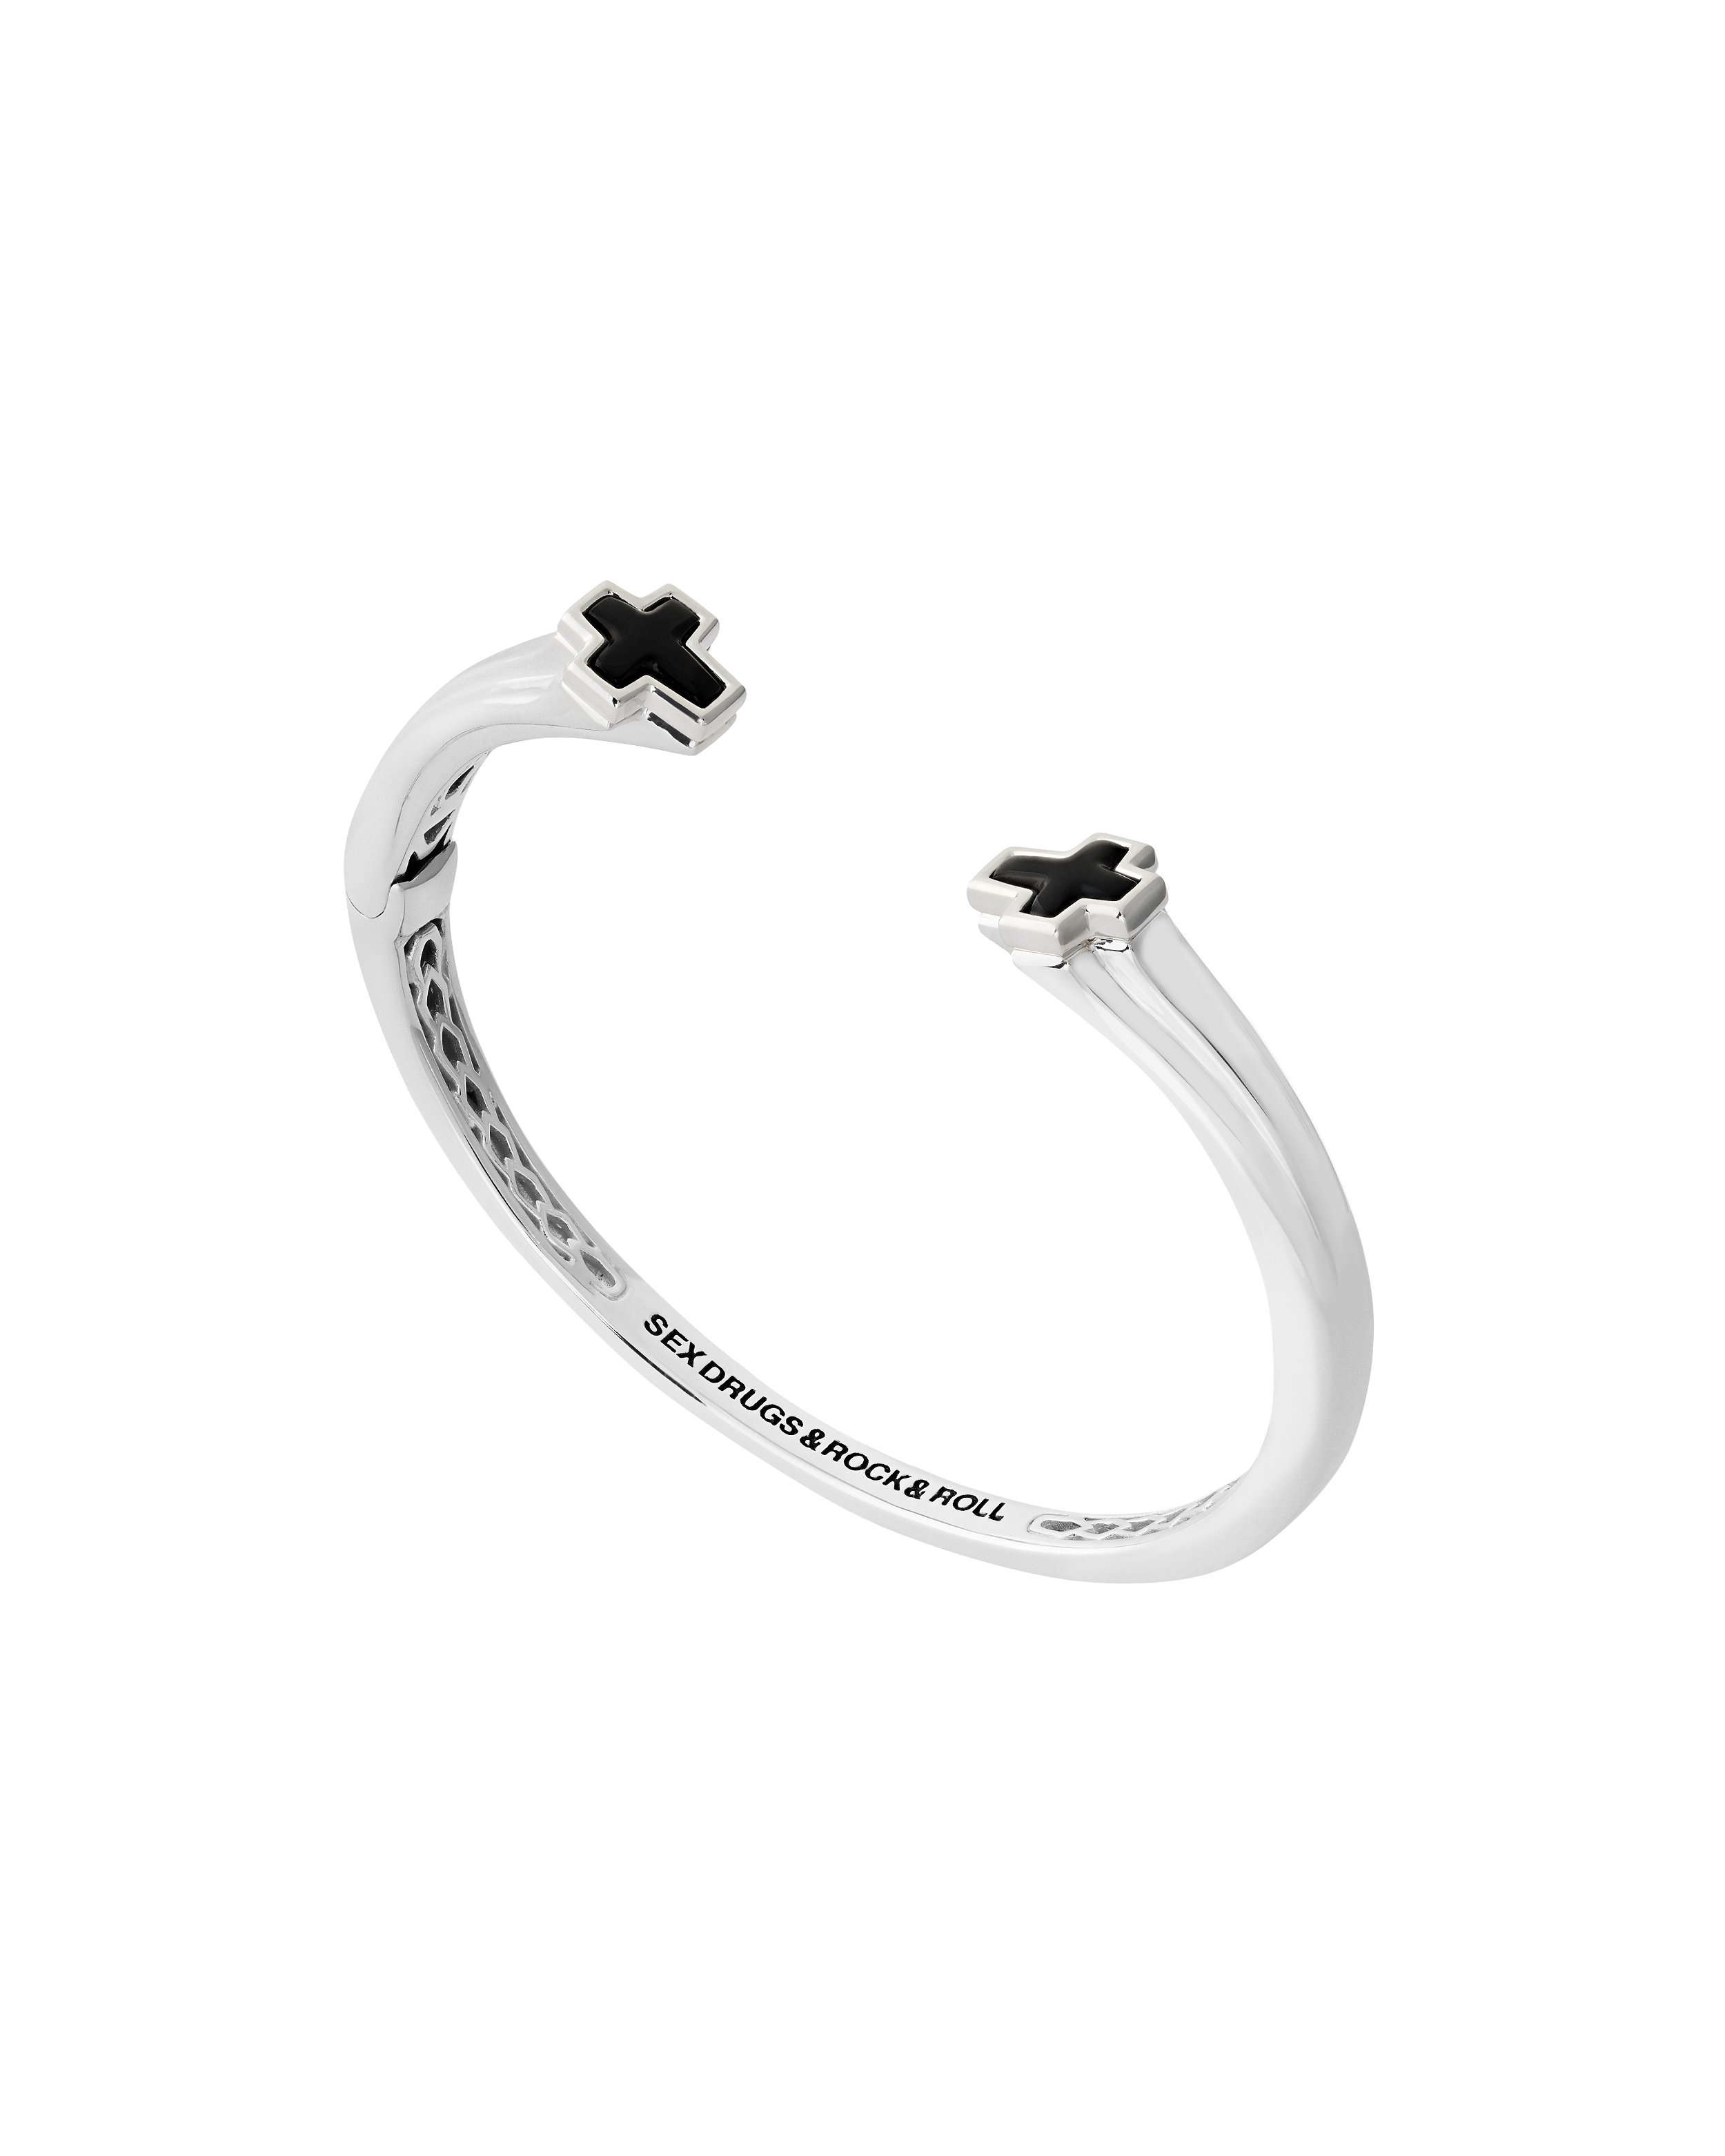 Thorn Sex Drugs & Rock "N" Roll Ring with Black Onyx and White Diamonds in Sterling Silver and 18kt Yellow Gold - Size 10